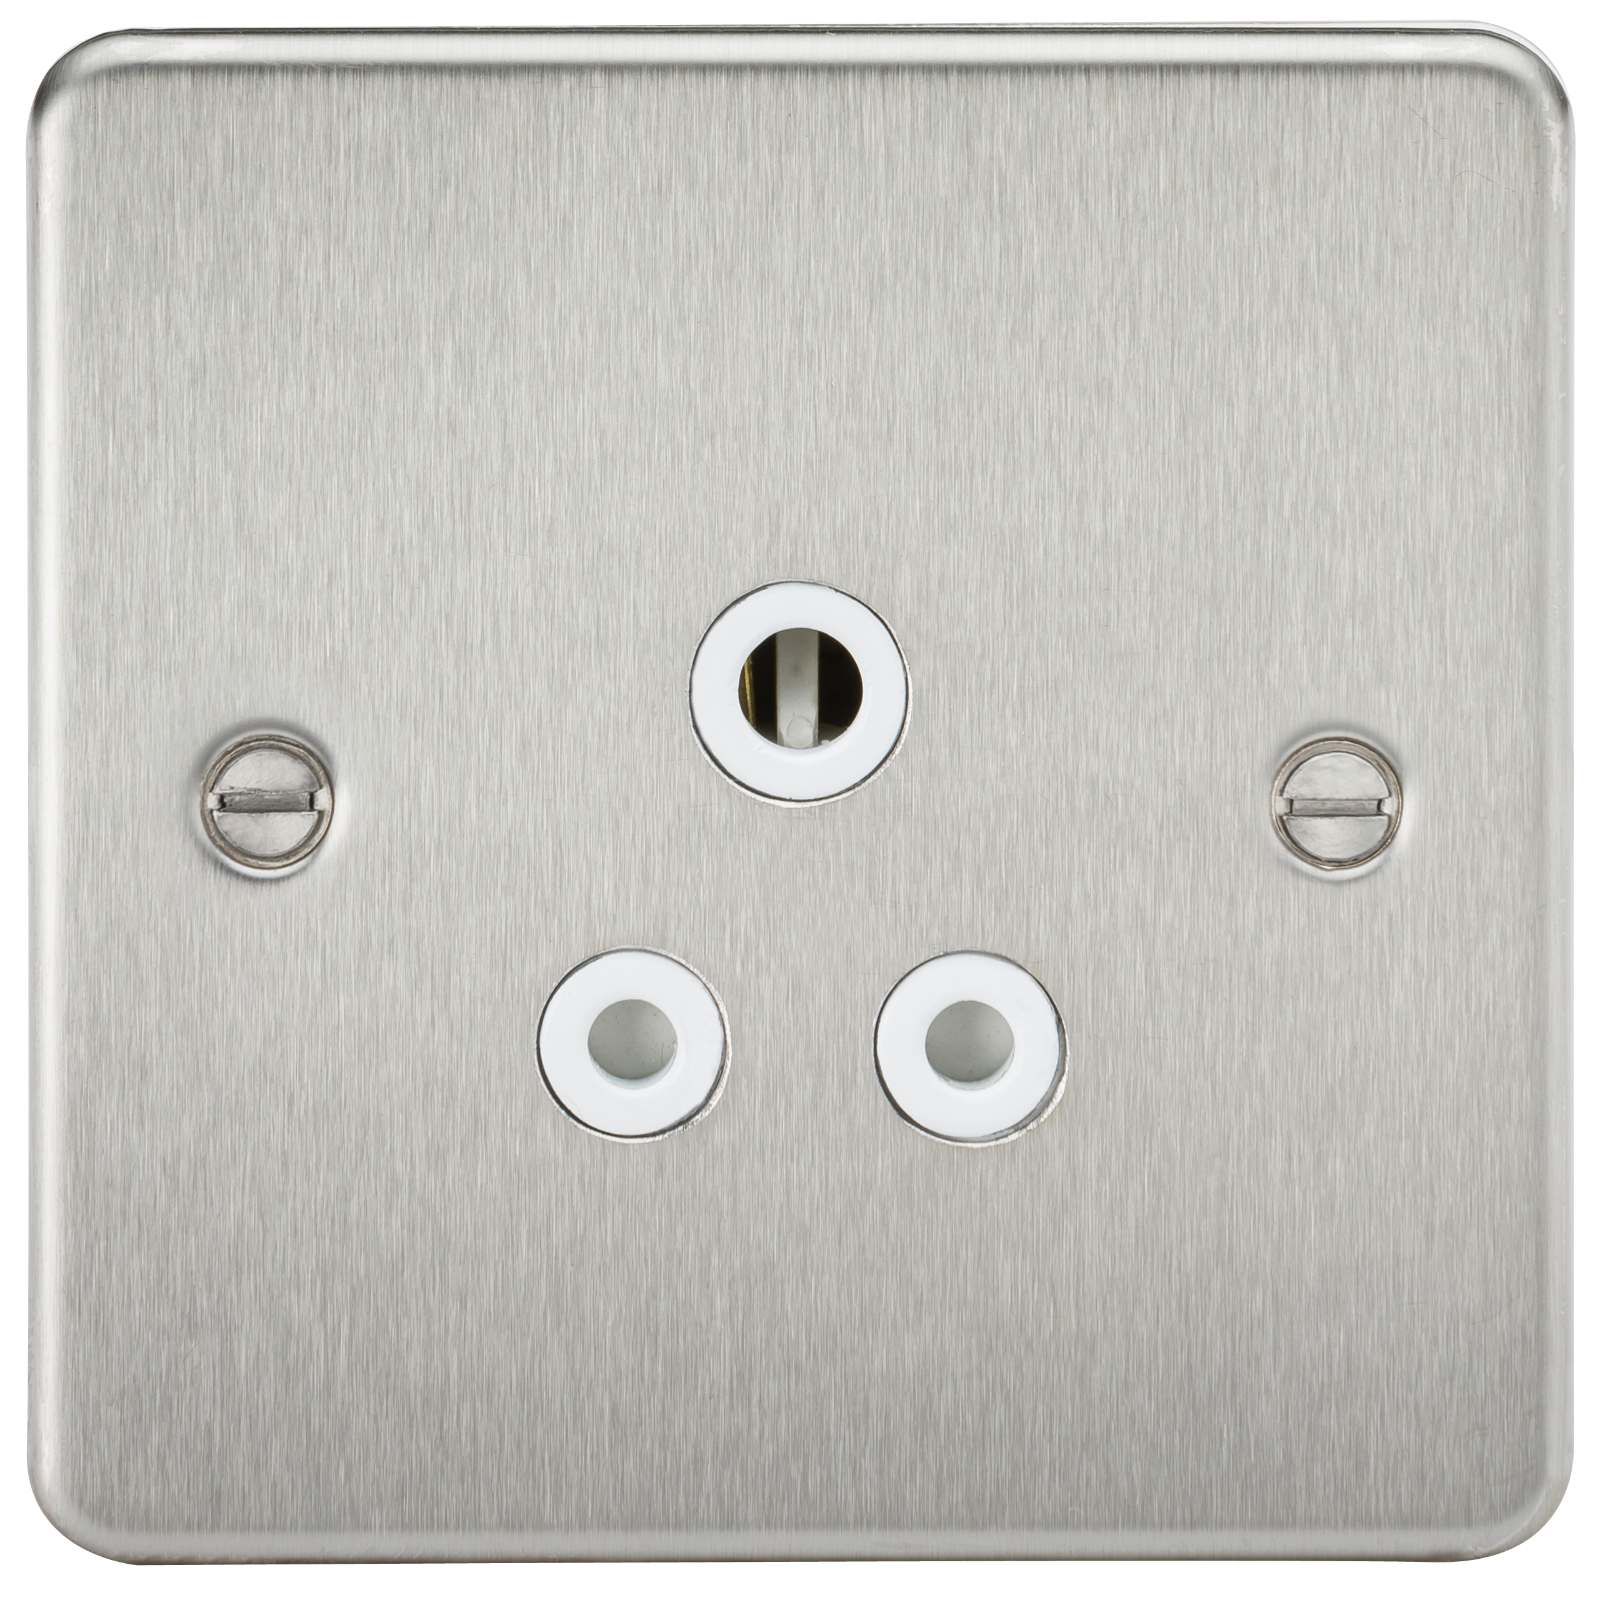 Flat Plate 5A Unswitched Socket - Brushed Chrome With White Insert - FP5ABCW 